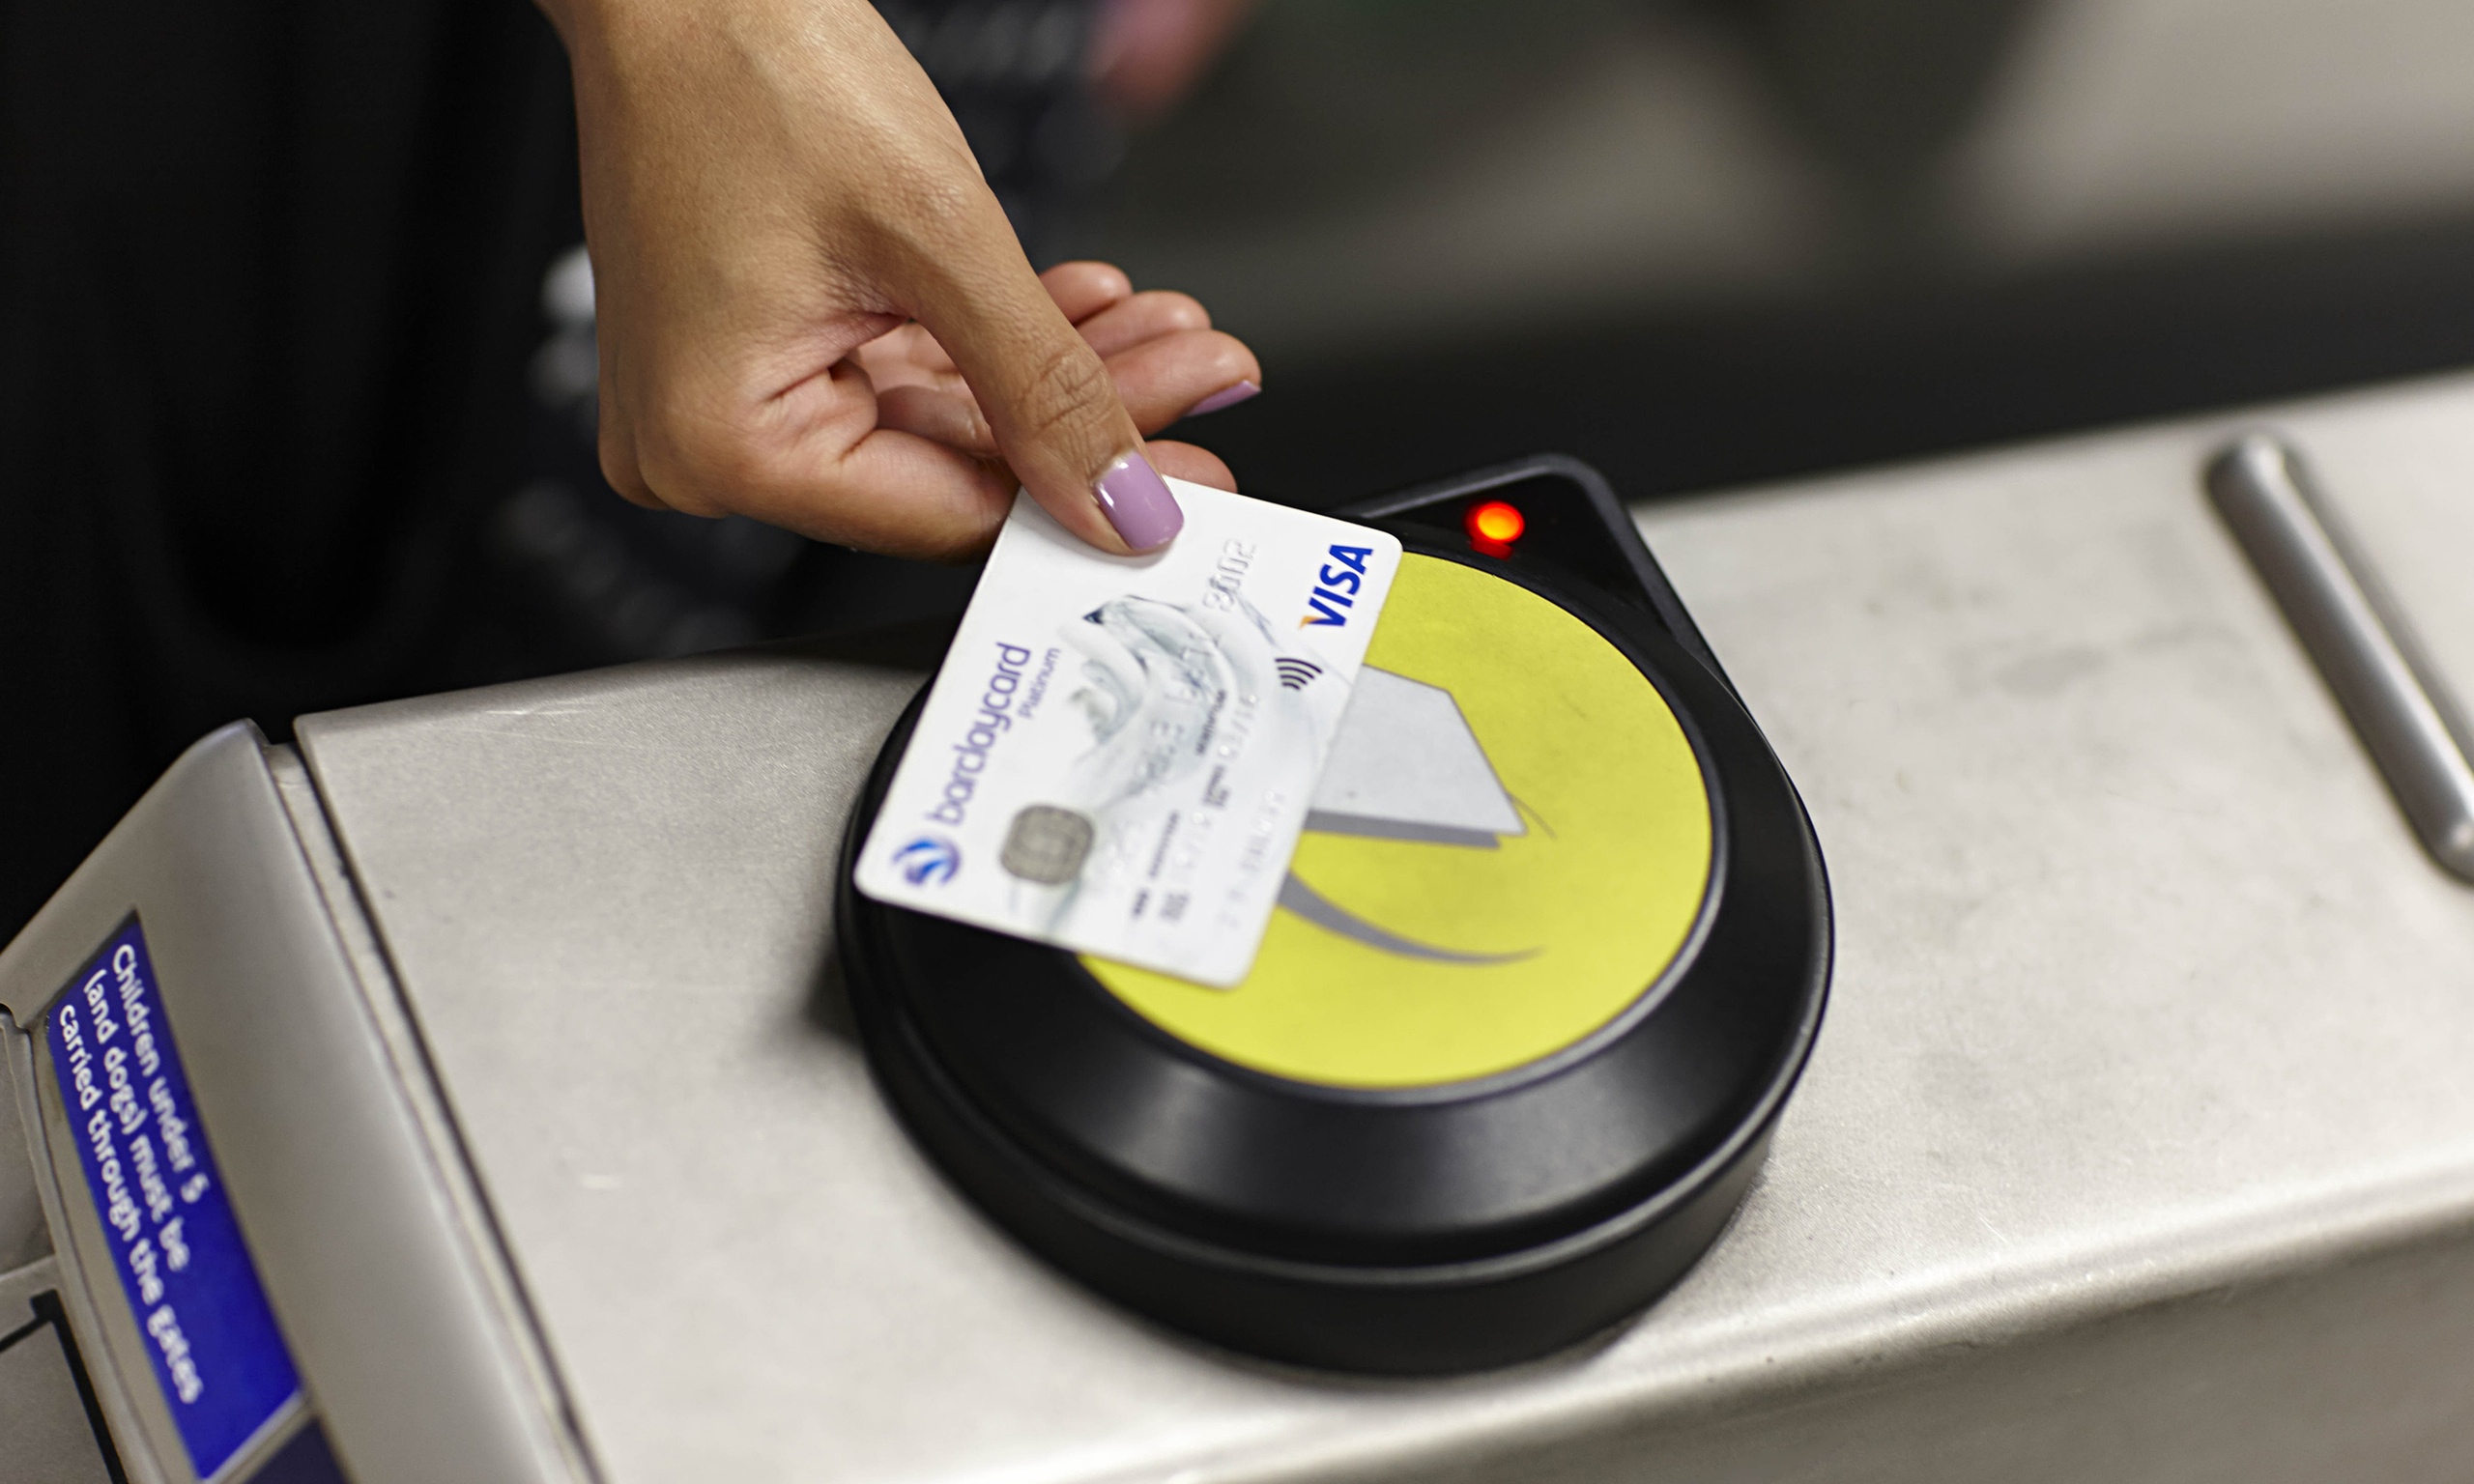 london travel card contactless